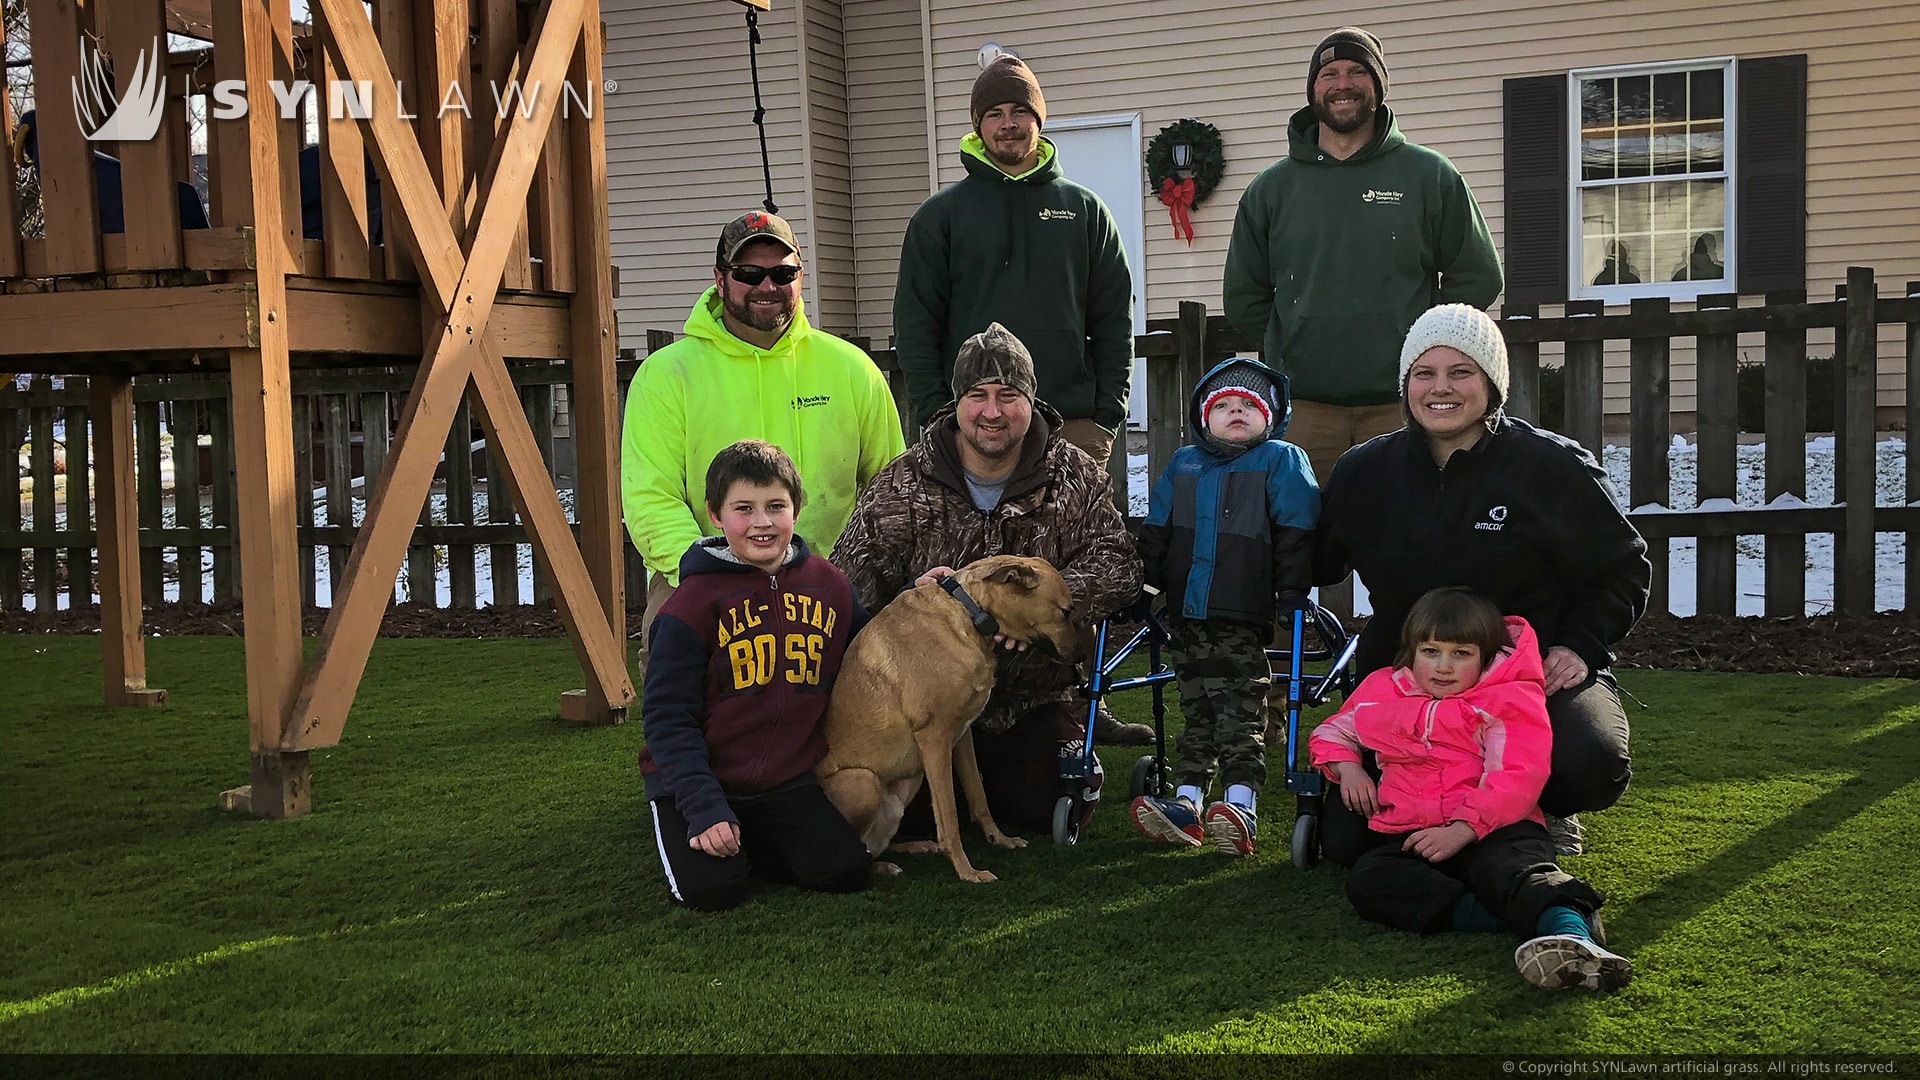 Make-A-Wish Kid Receives Dream Outdoor Play Area from SYNLawn Wisconsin